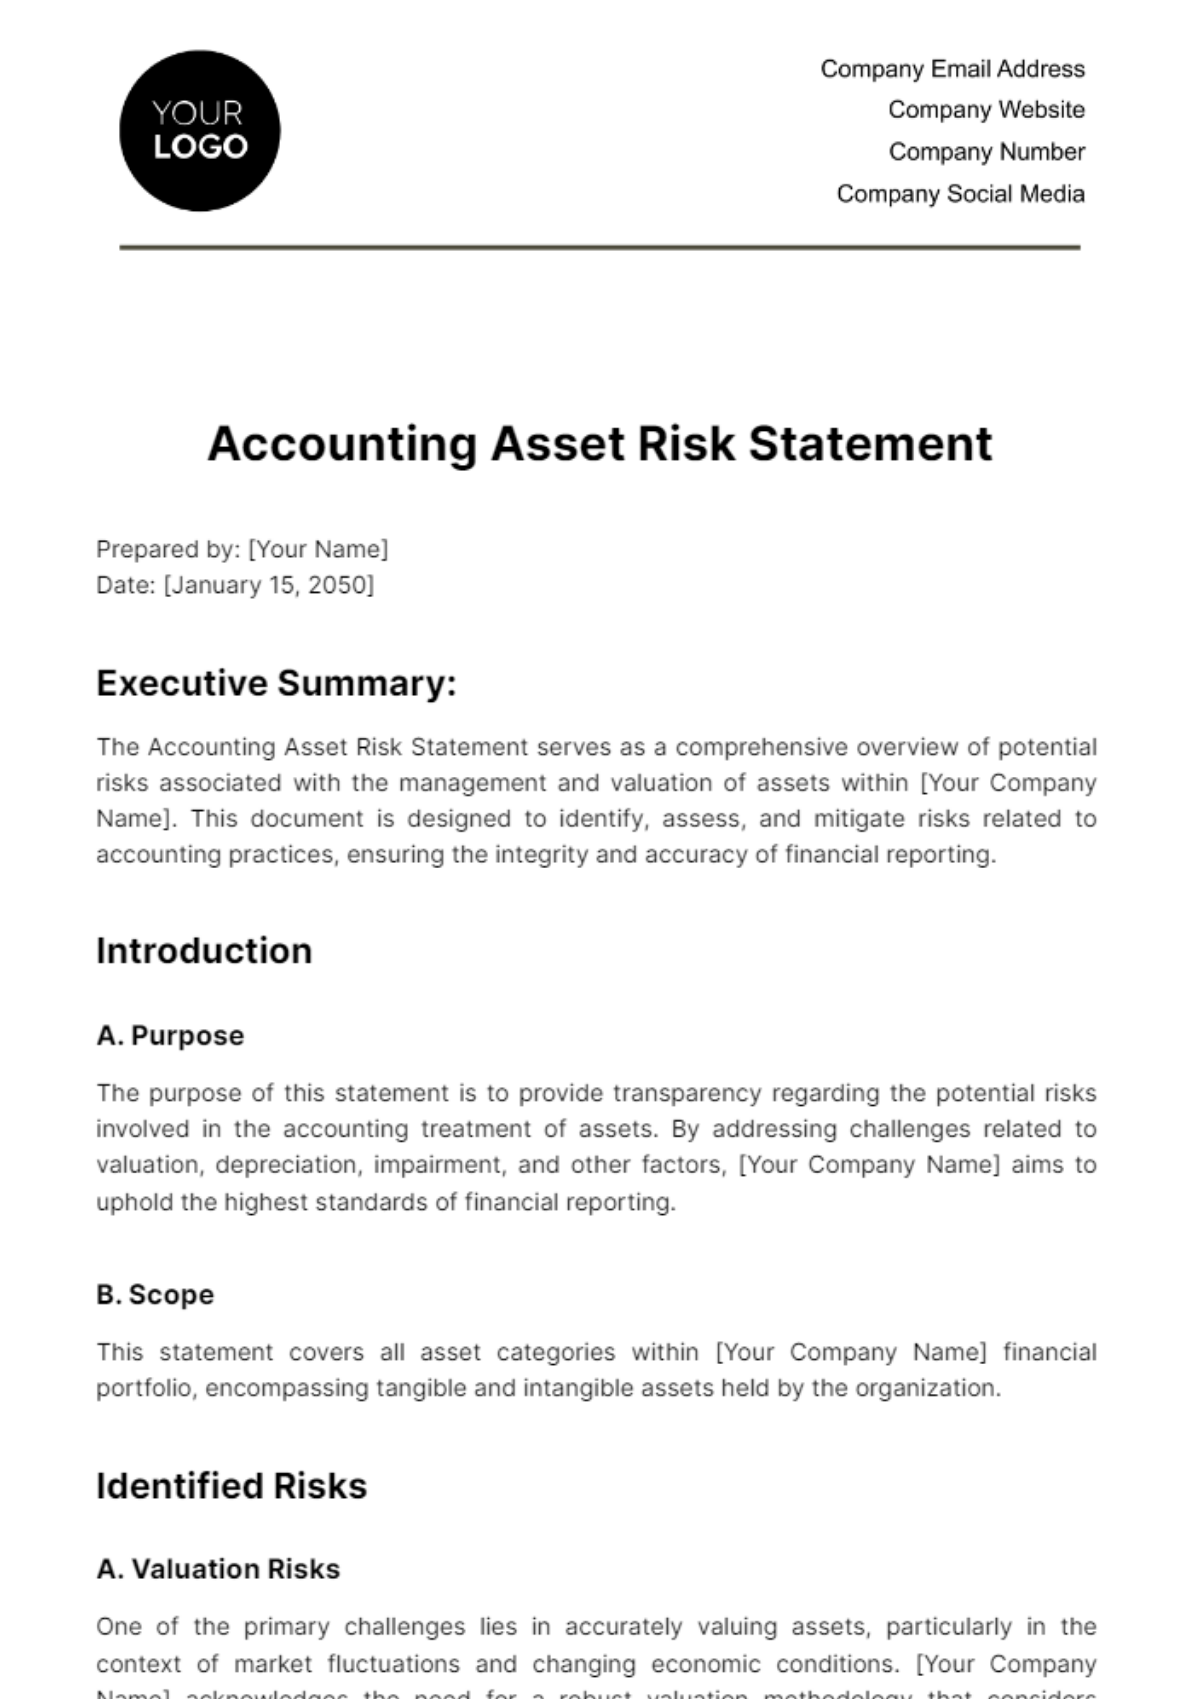 Free Accounting Asset Risk Statement Template